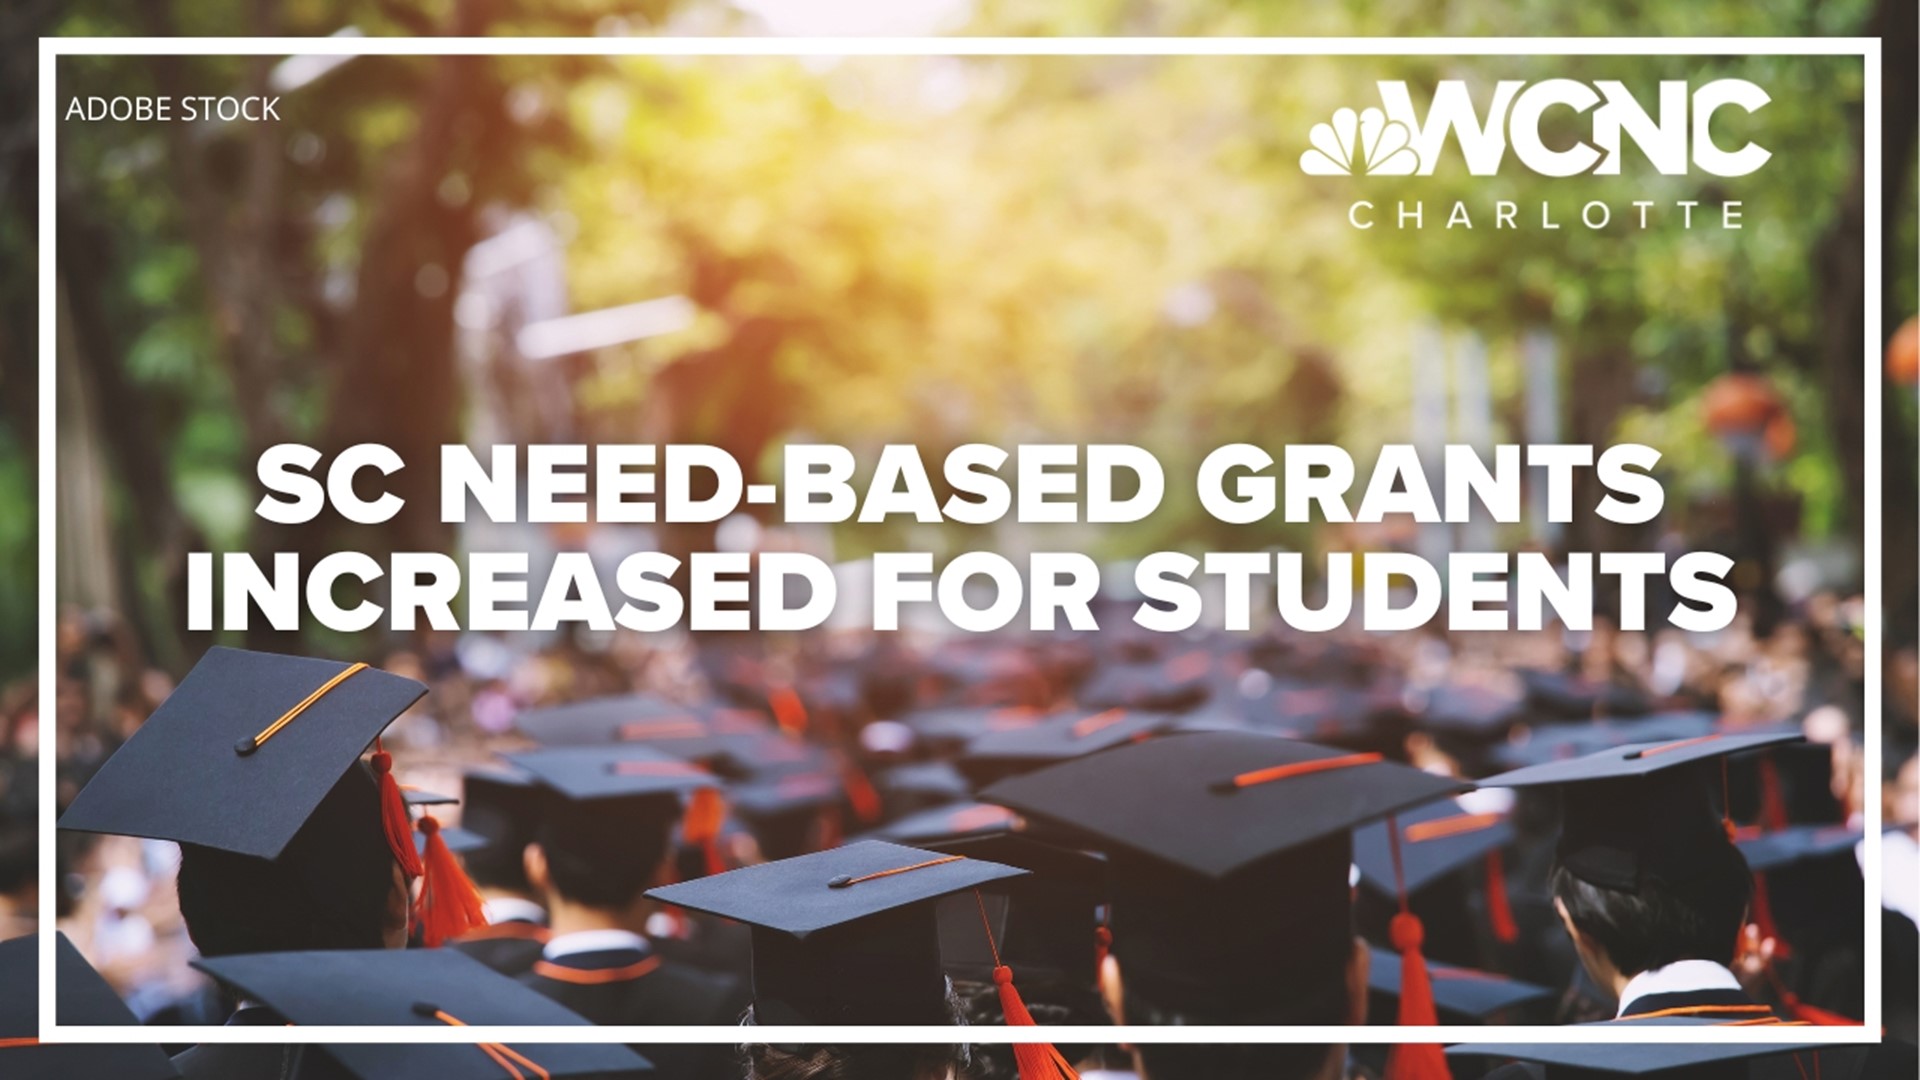 The Commission on Higher Education increased need-based grants to help cover the cost of college.